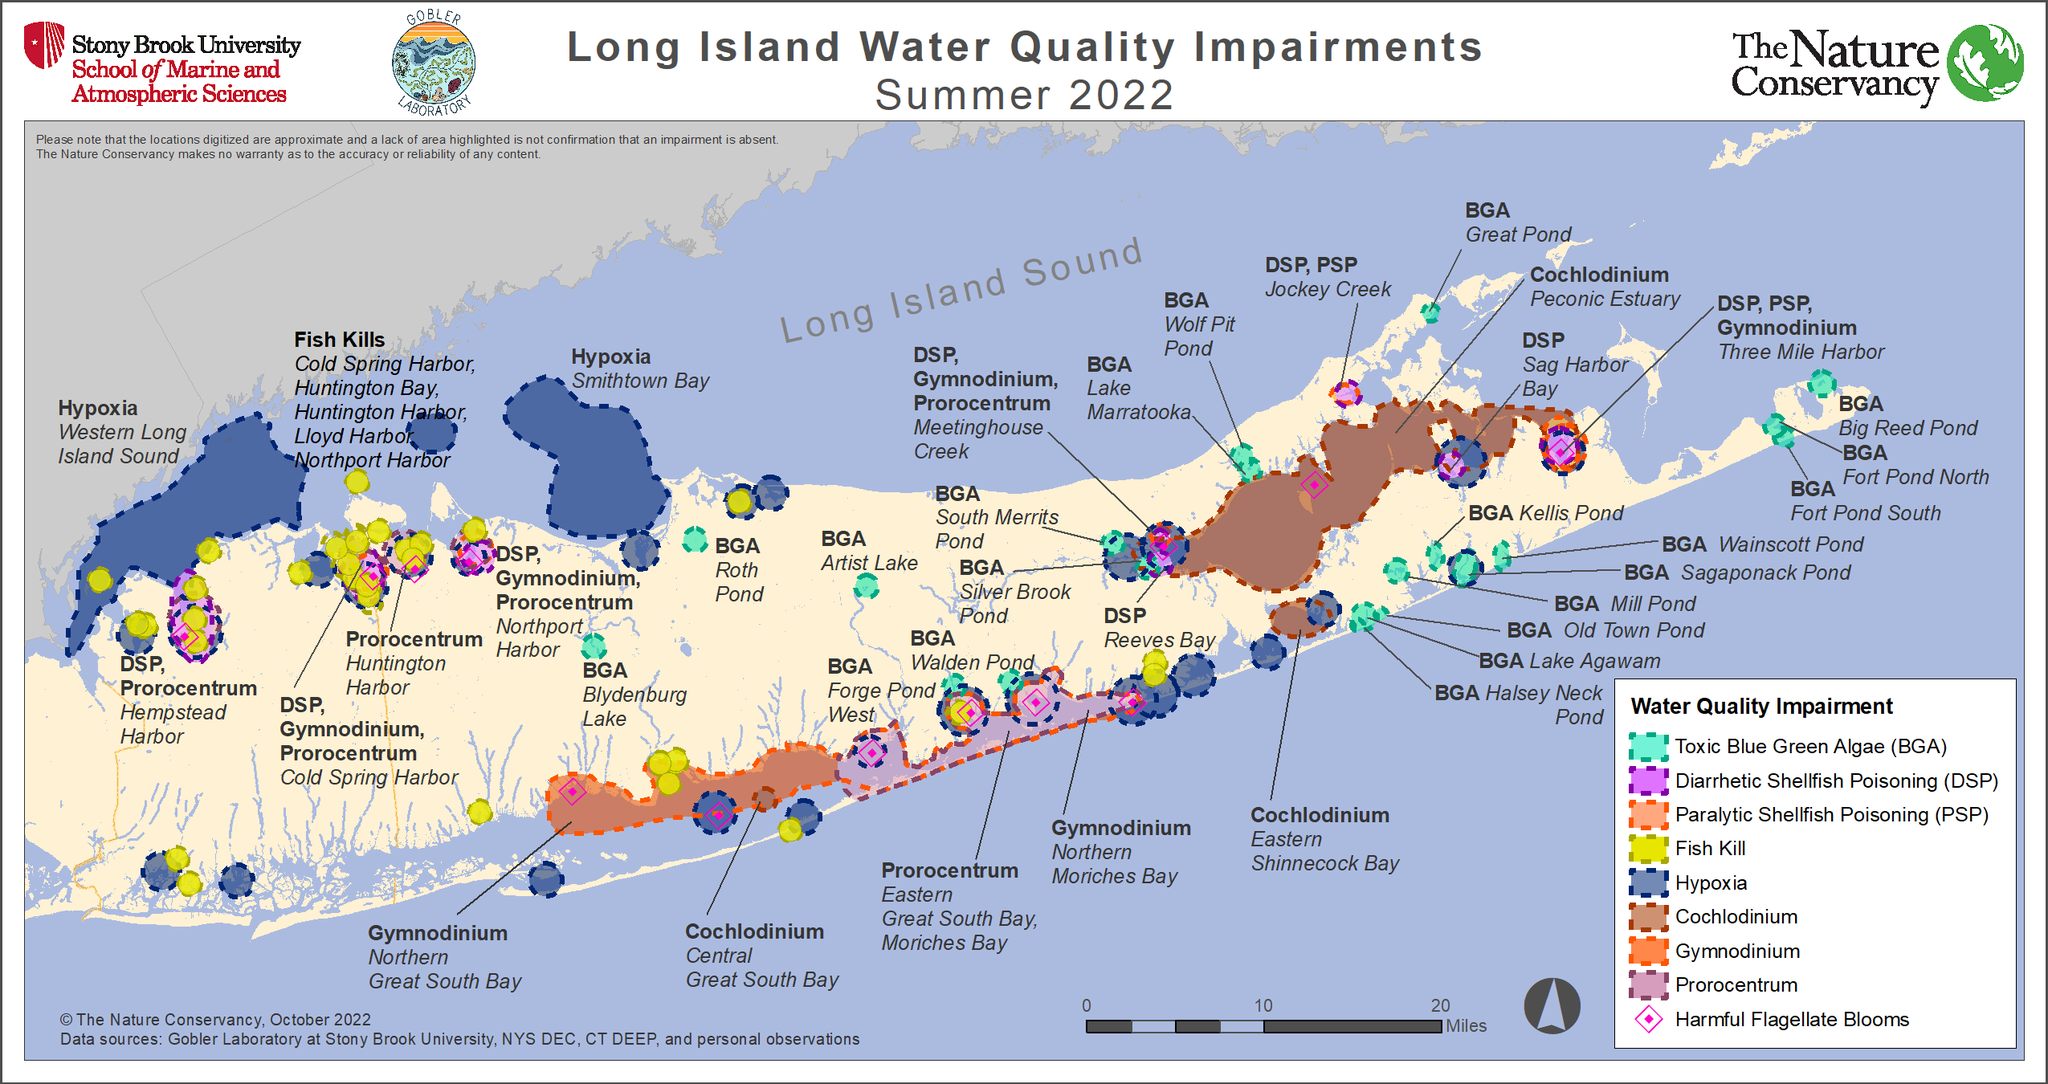 This map shows the many water quality impairments that occurred across Long Island in the Summer of 2022. The Gobler Lab at Stony Brook University monitors our waters and produces a new impairment map each year.